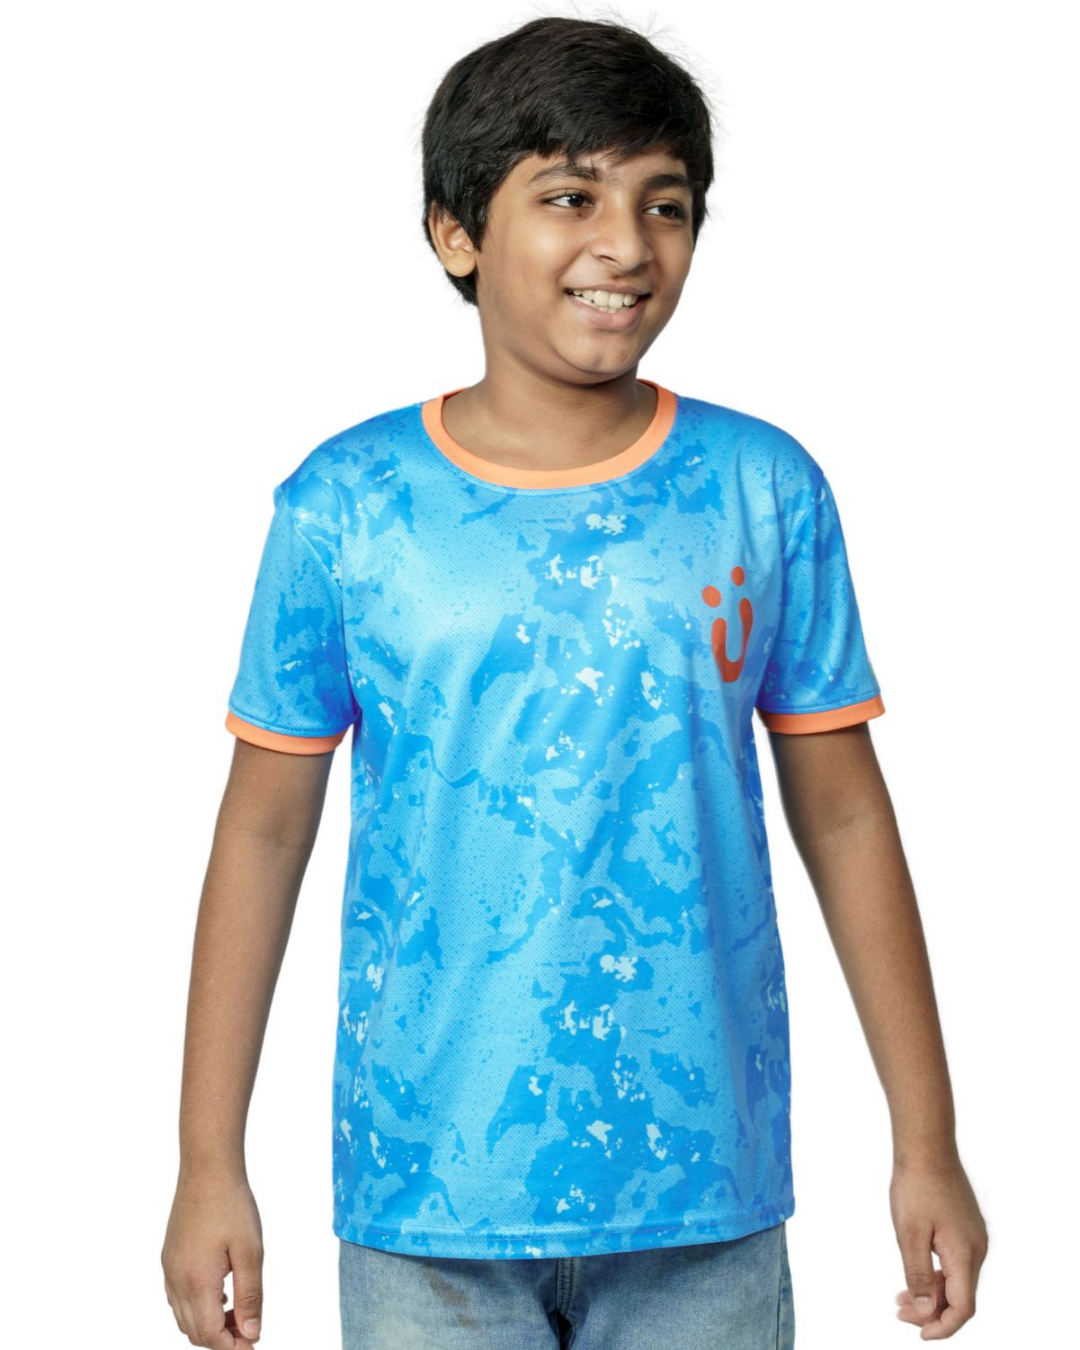 INDIA JERSEY